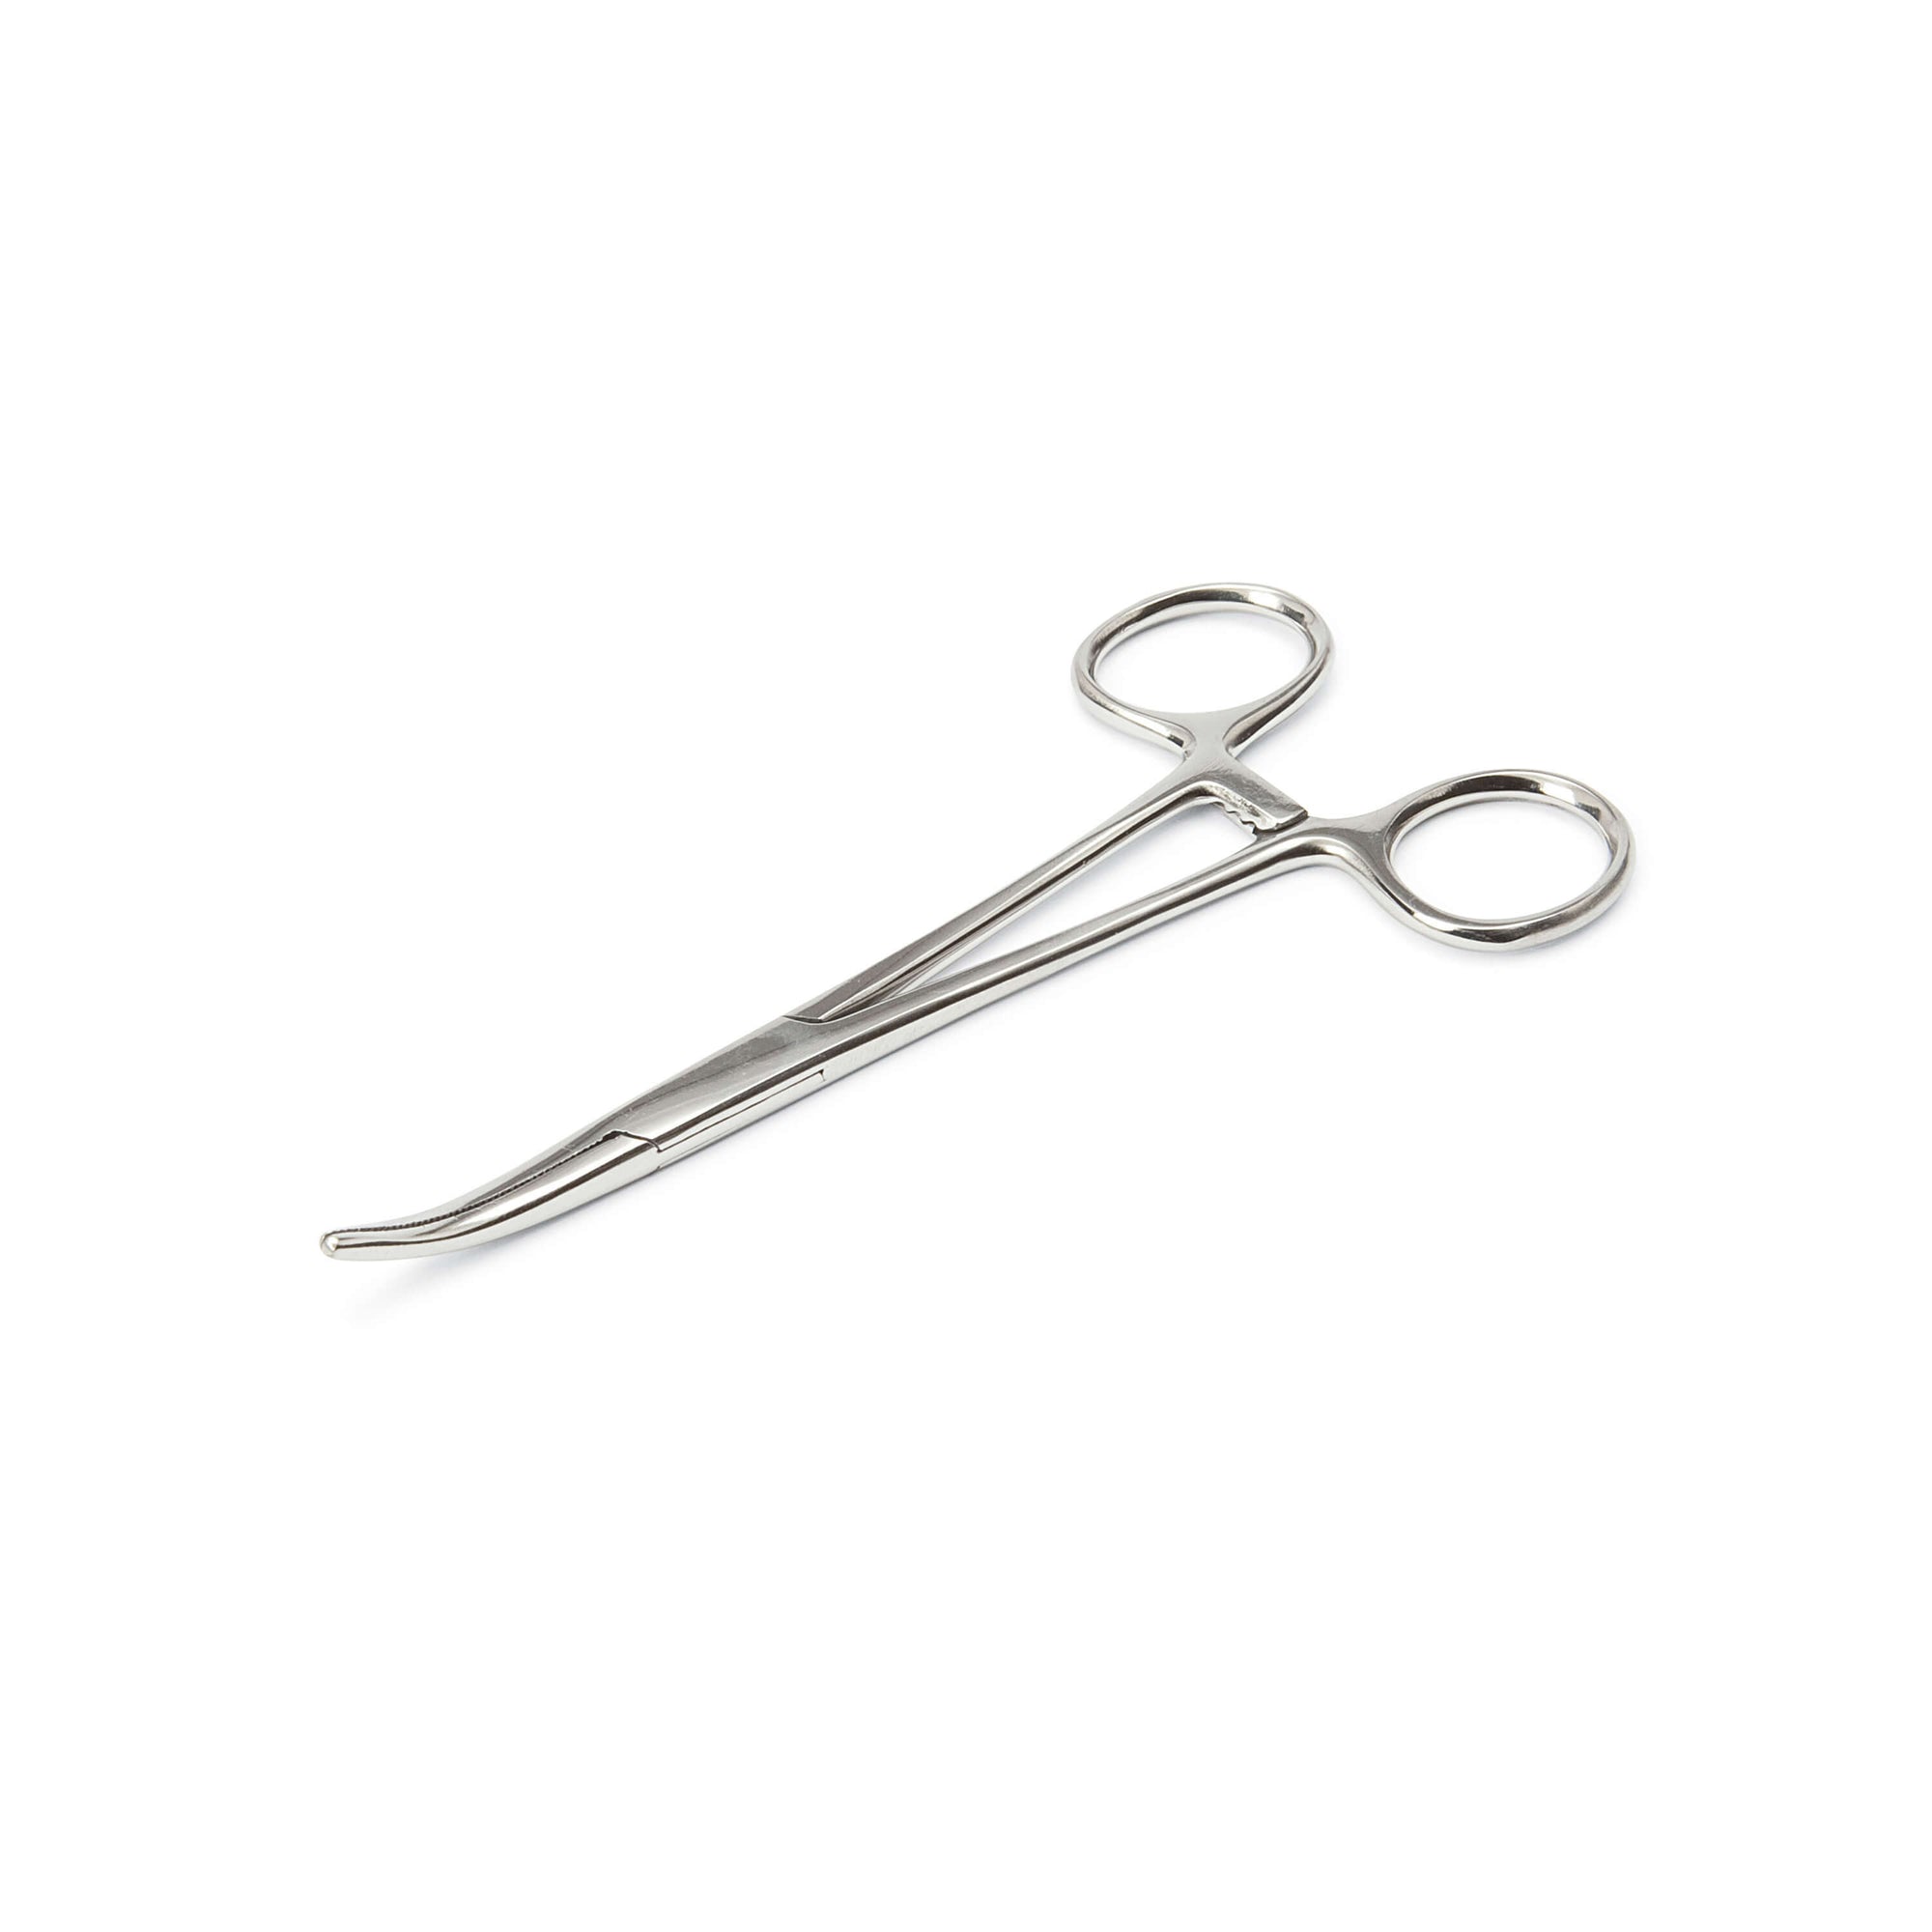 Curved-Jaw Forceps